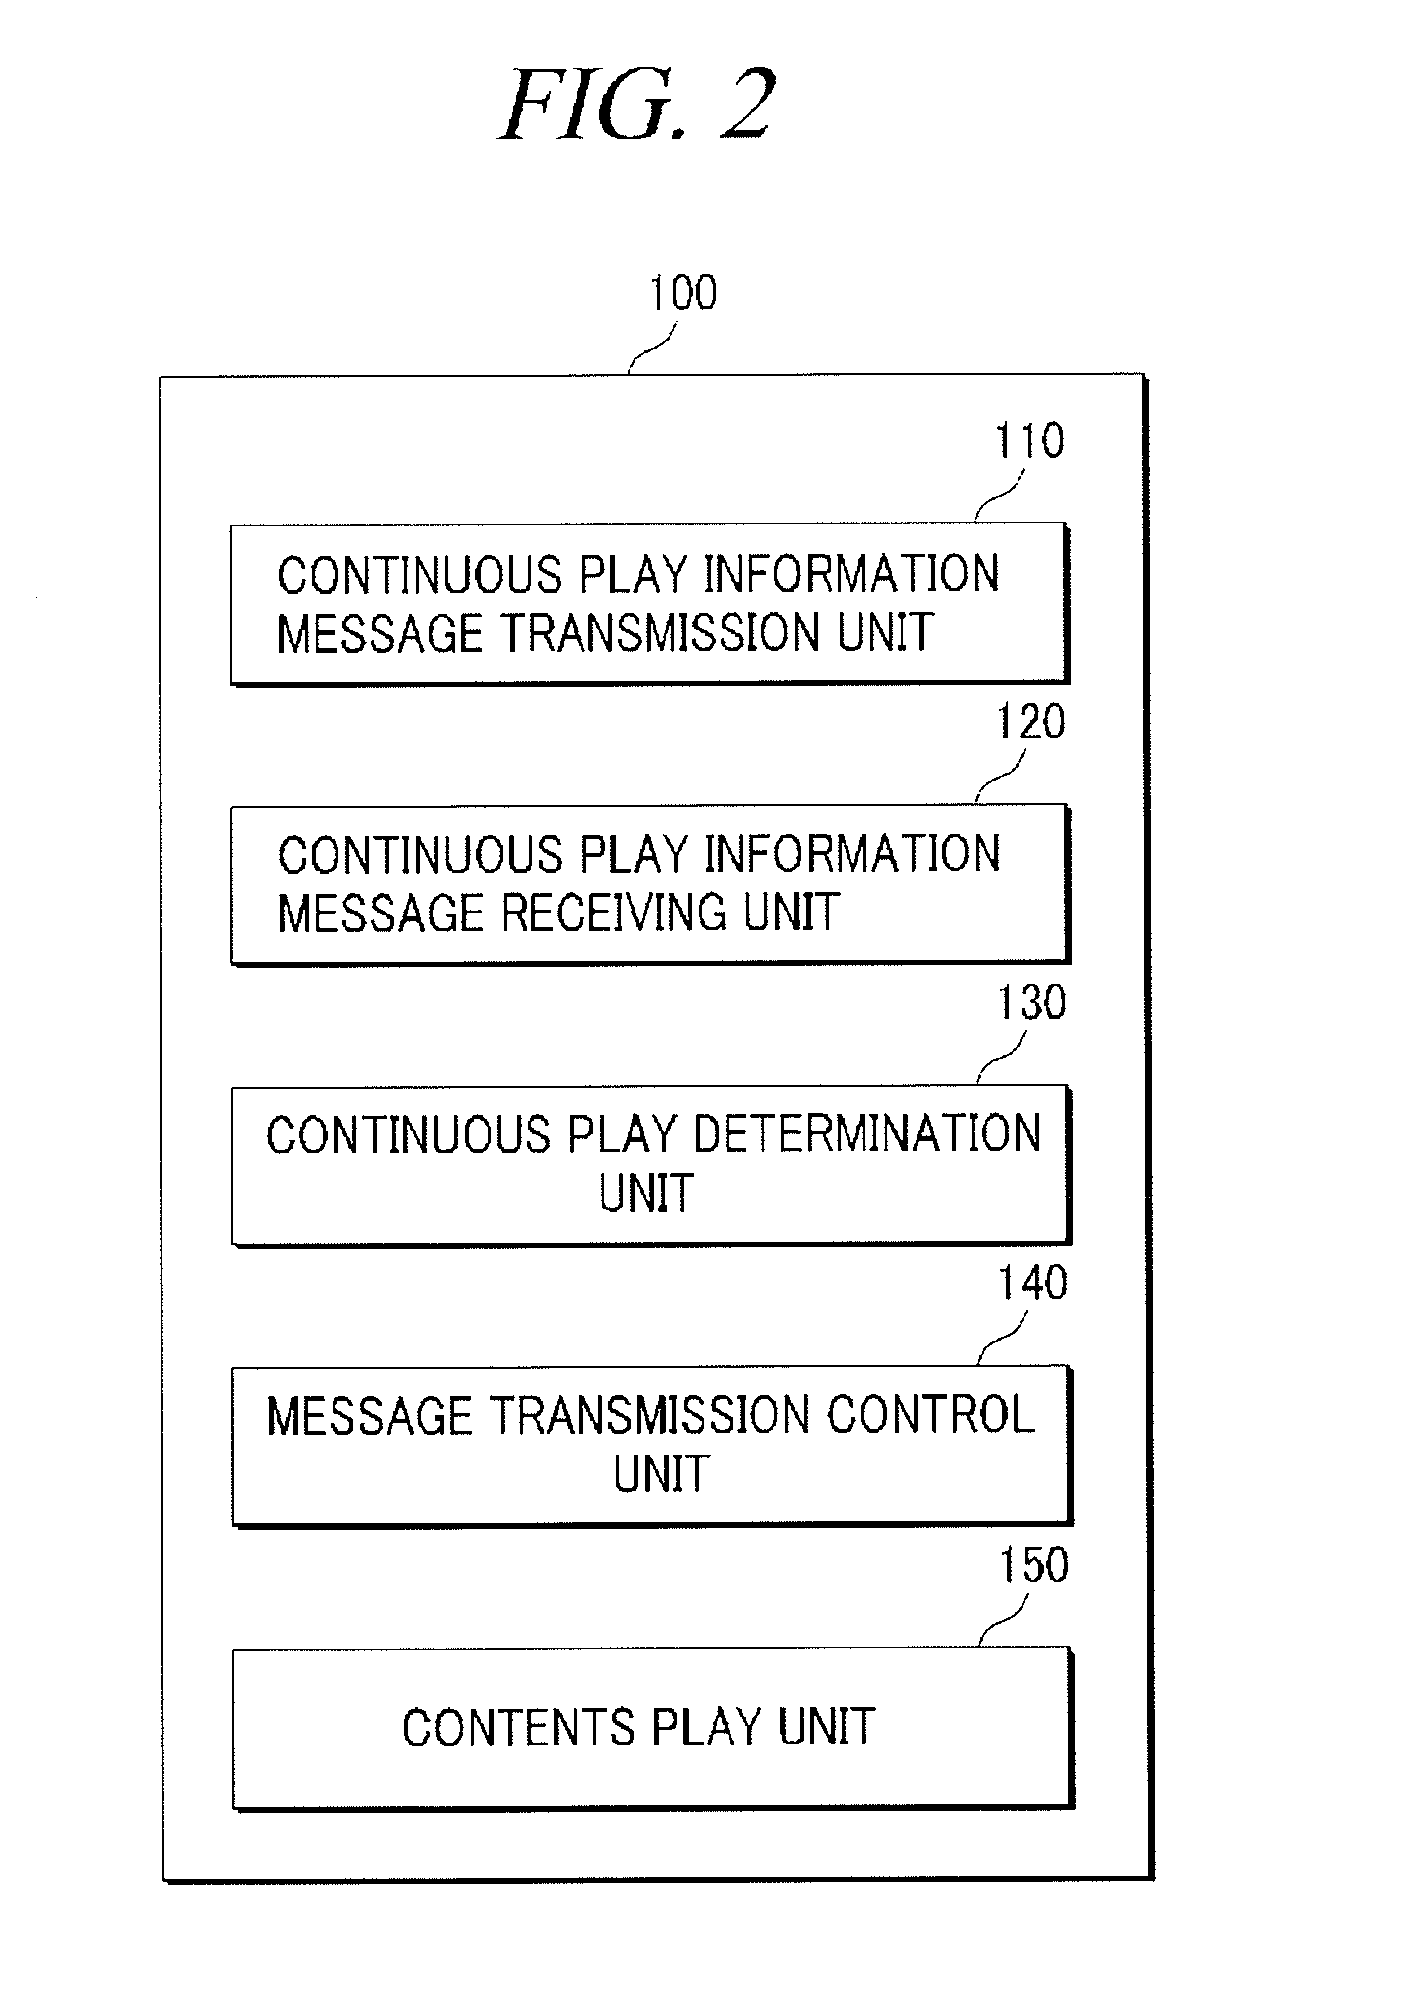 Method and server for continuously providing contents for mobile user devices based on locations thereof